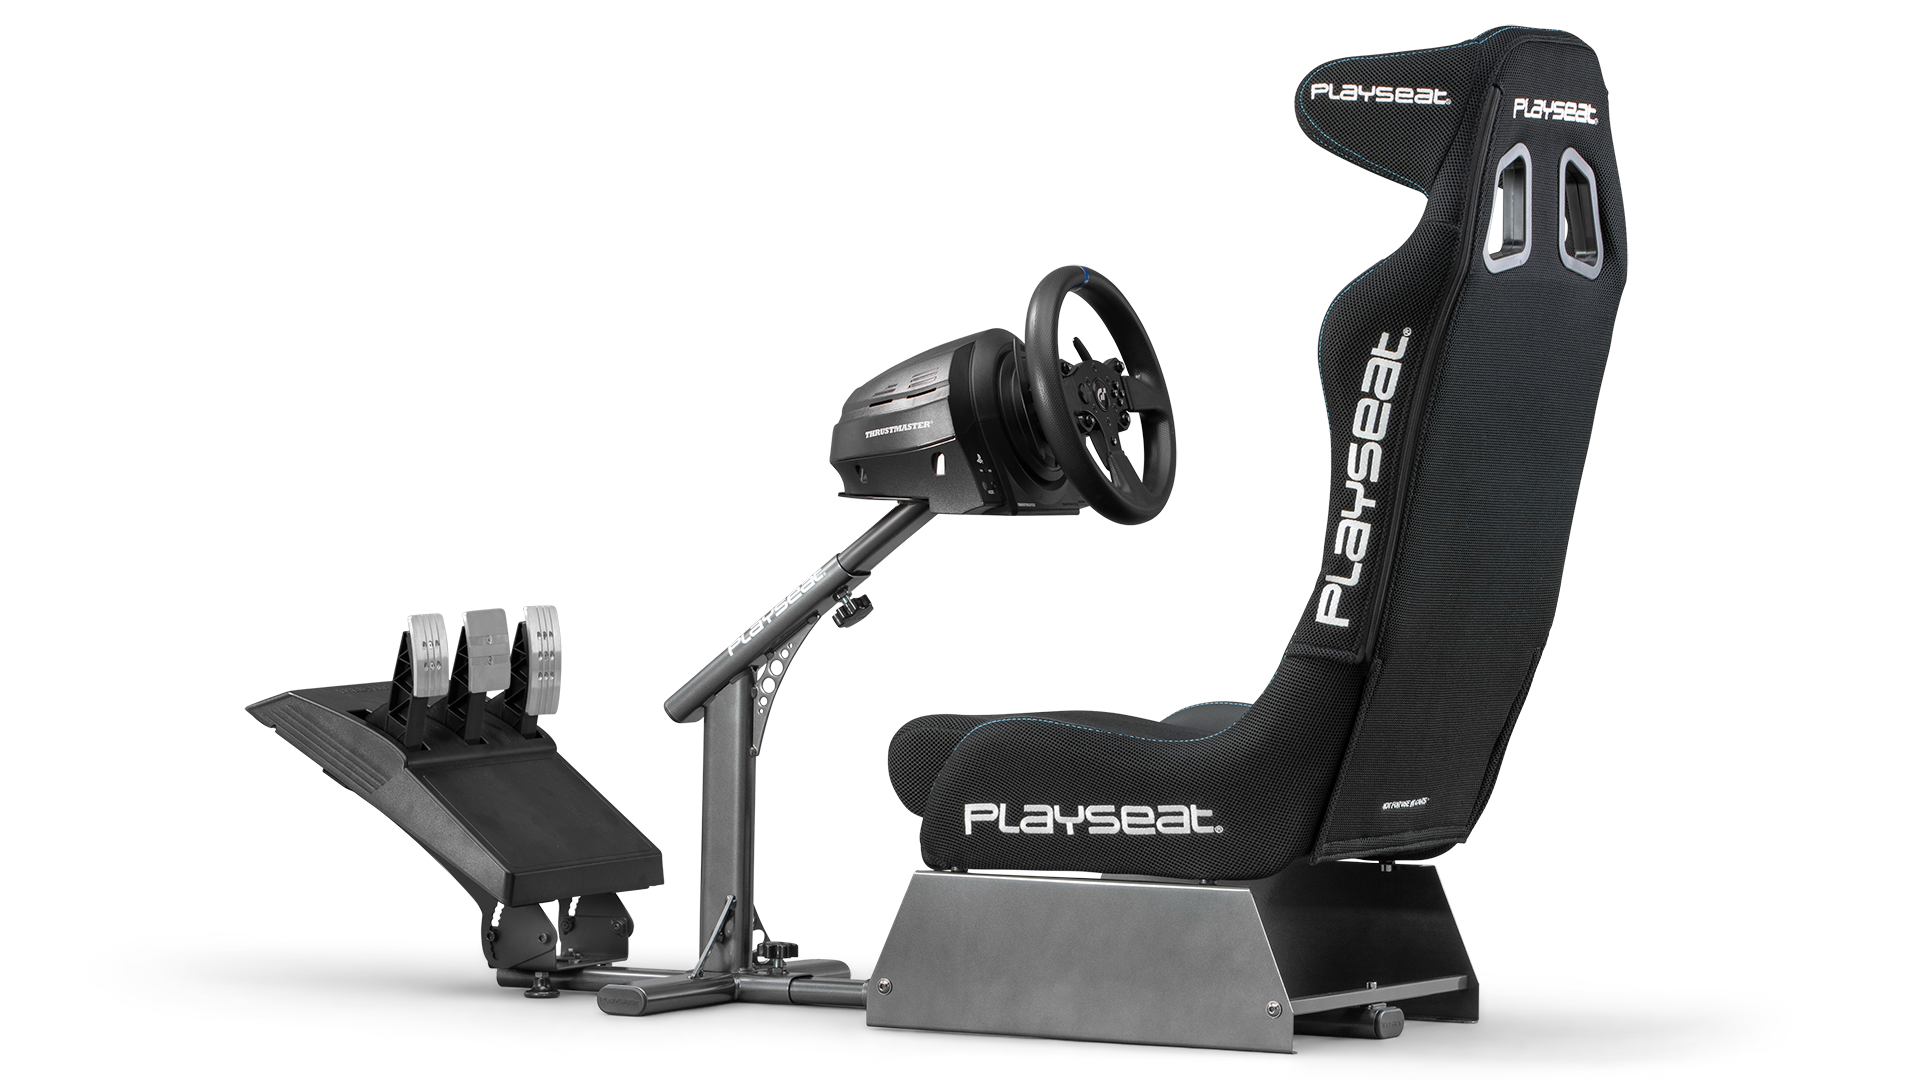 playseat-evolution-pro-black-actifit-racing-simulator-back-angle-view-thrustmaster-1920x1080-1.png